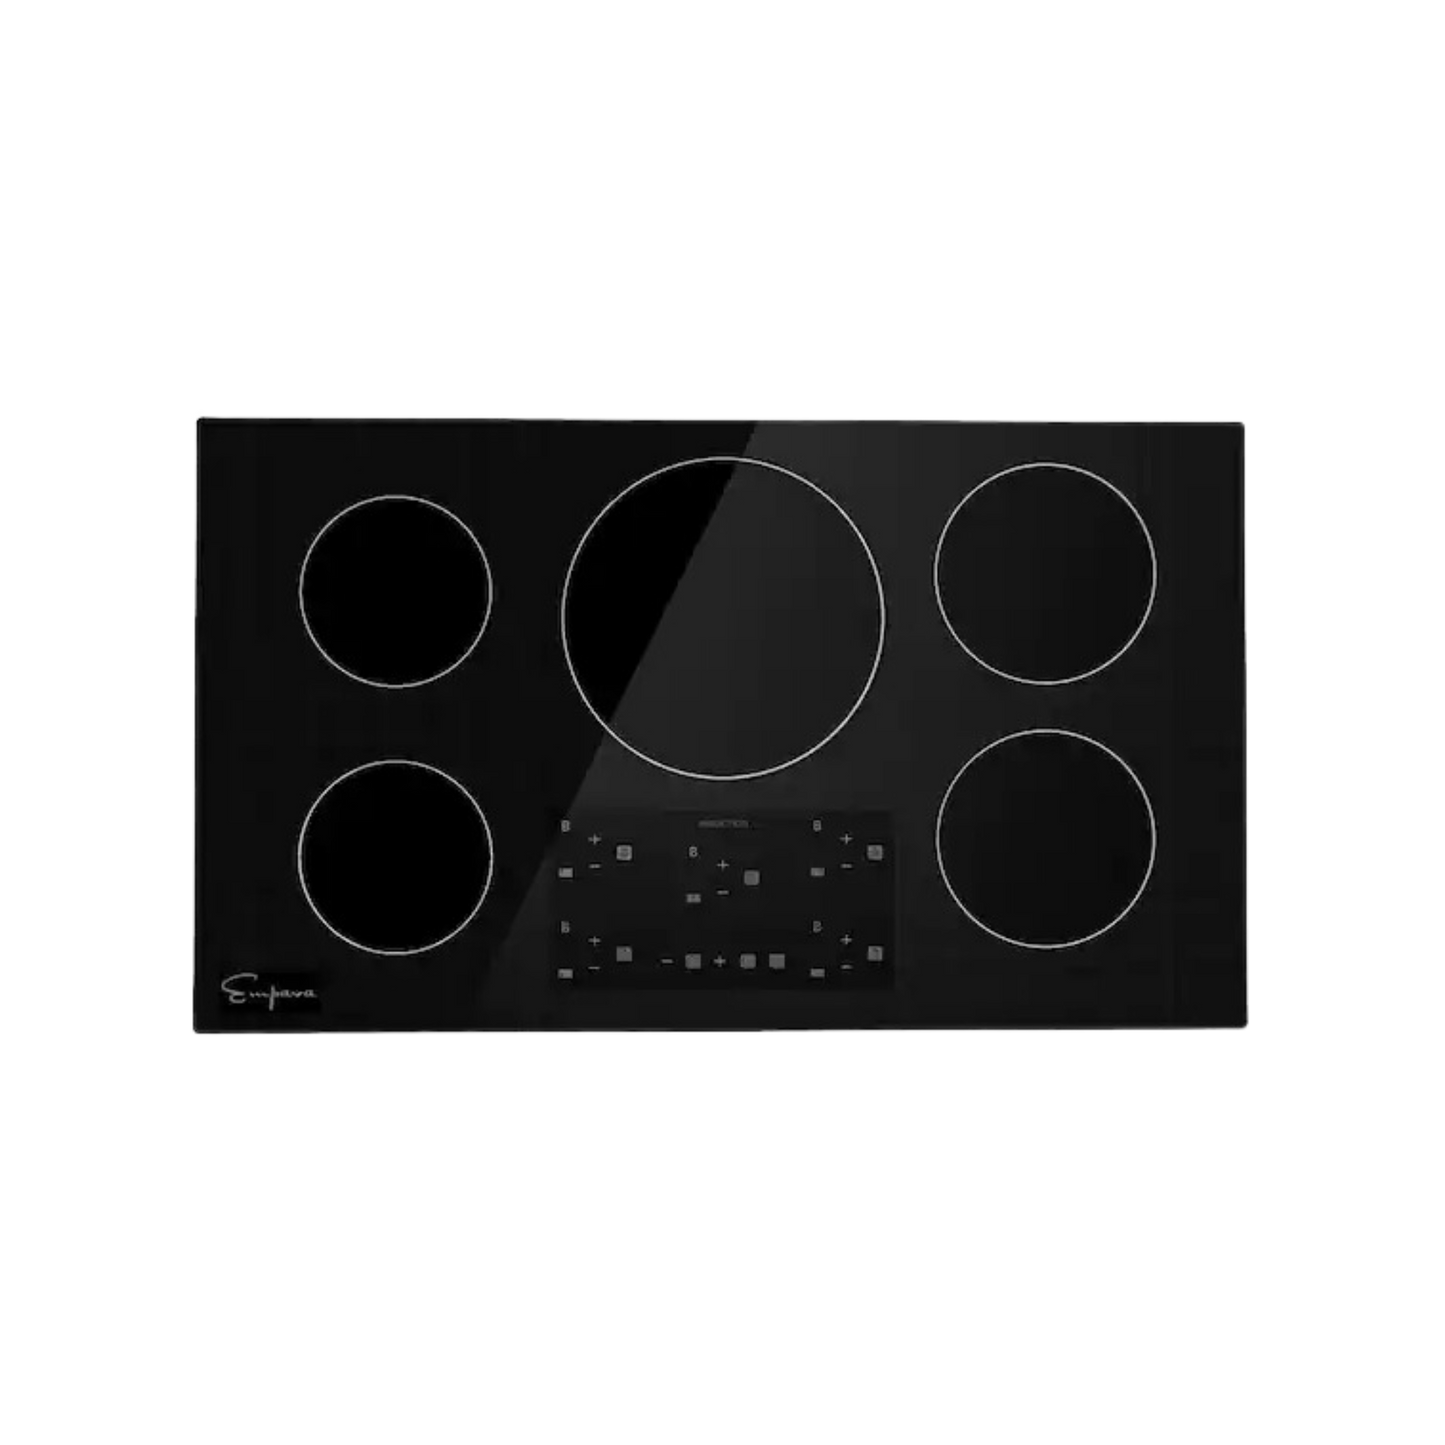 Empava Built-in 36 in. Induction Electric Modular Cooktop in Black with 5 Elements including Melting Elements EMPV-IDC36